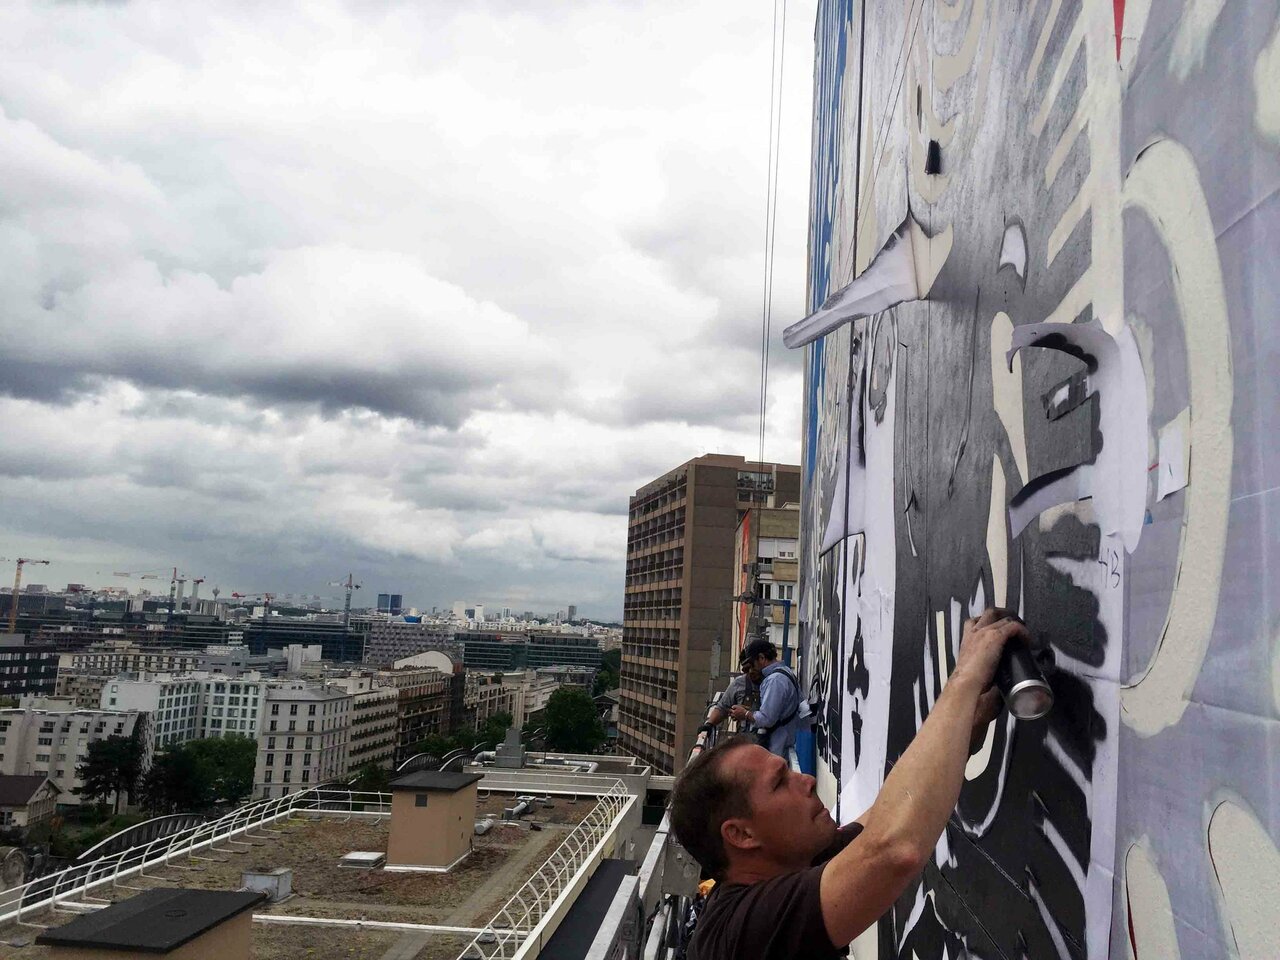 Working on the third #Paris #mural. @g_itinerrance #obeygiant #obey #shepardfairey https://t.co/MOyN2Fo9Cm